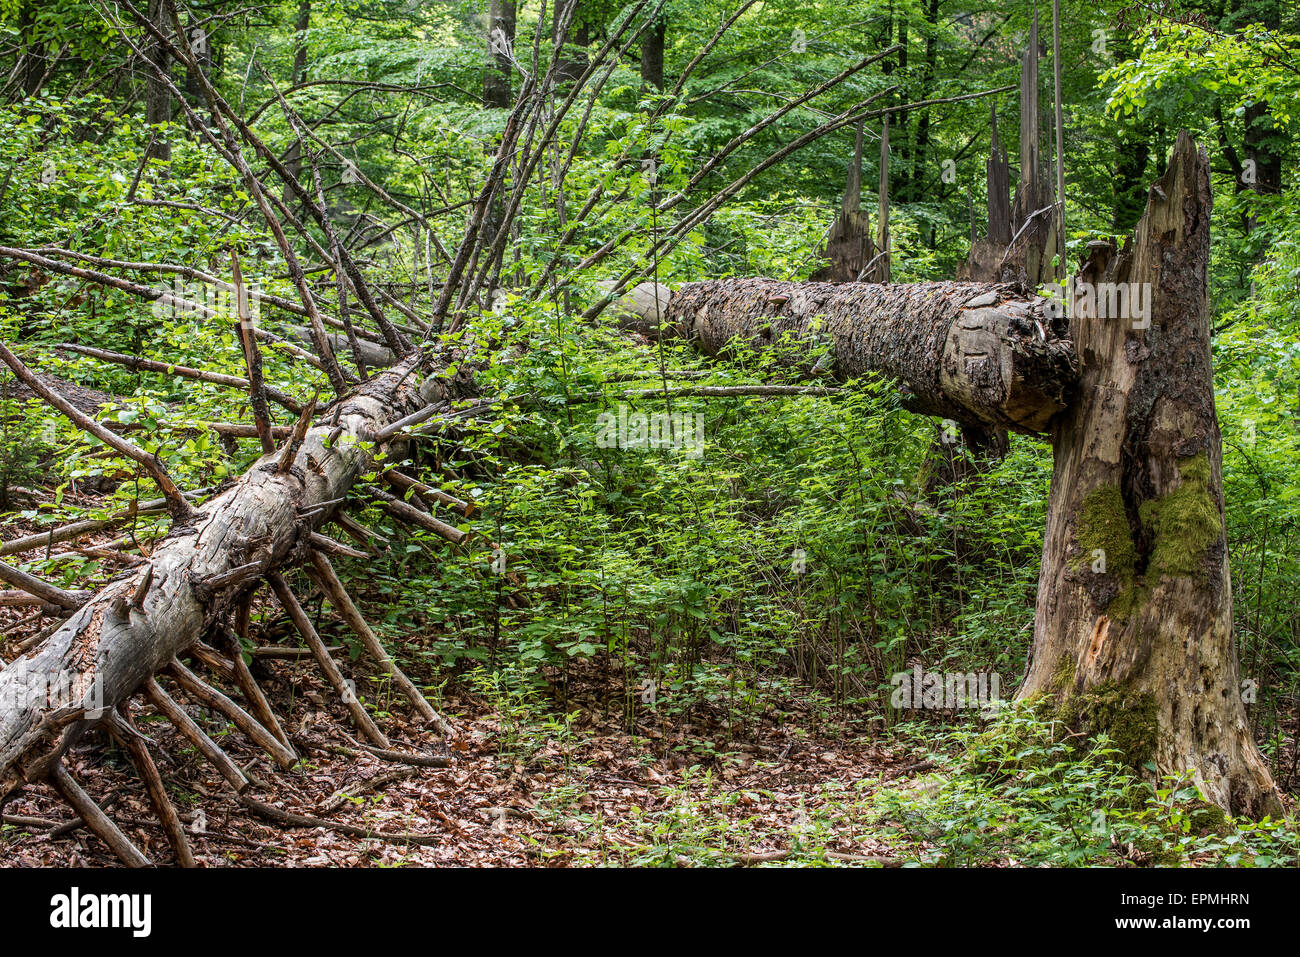 Storm damage in forest showing broken tree trunks, snapped by hurricane winds Stock Photo